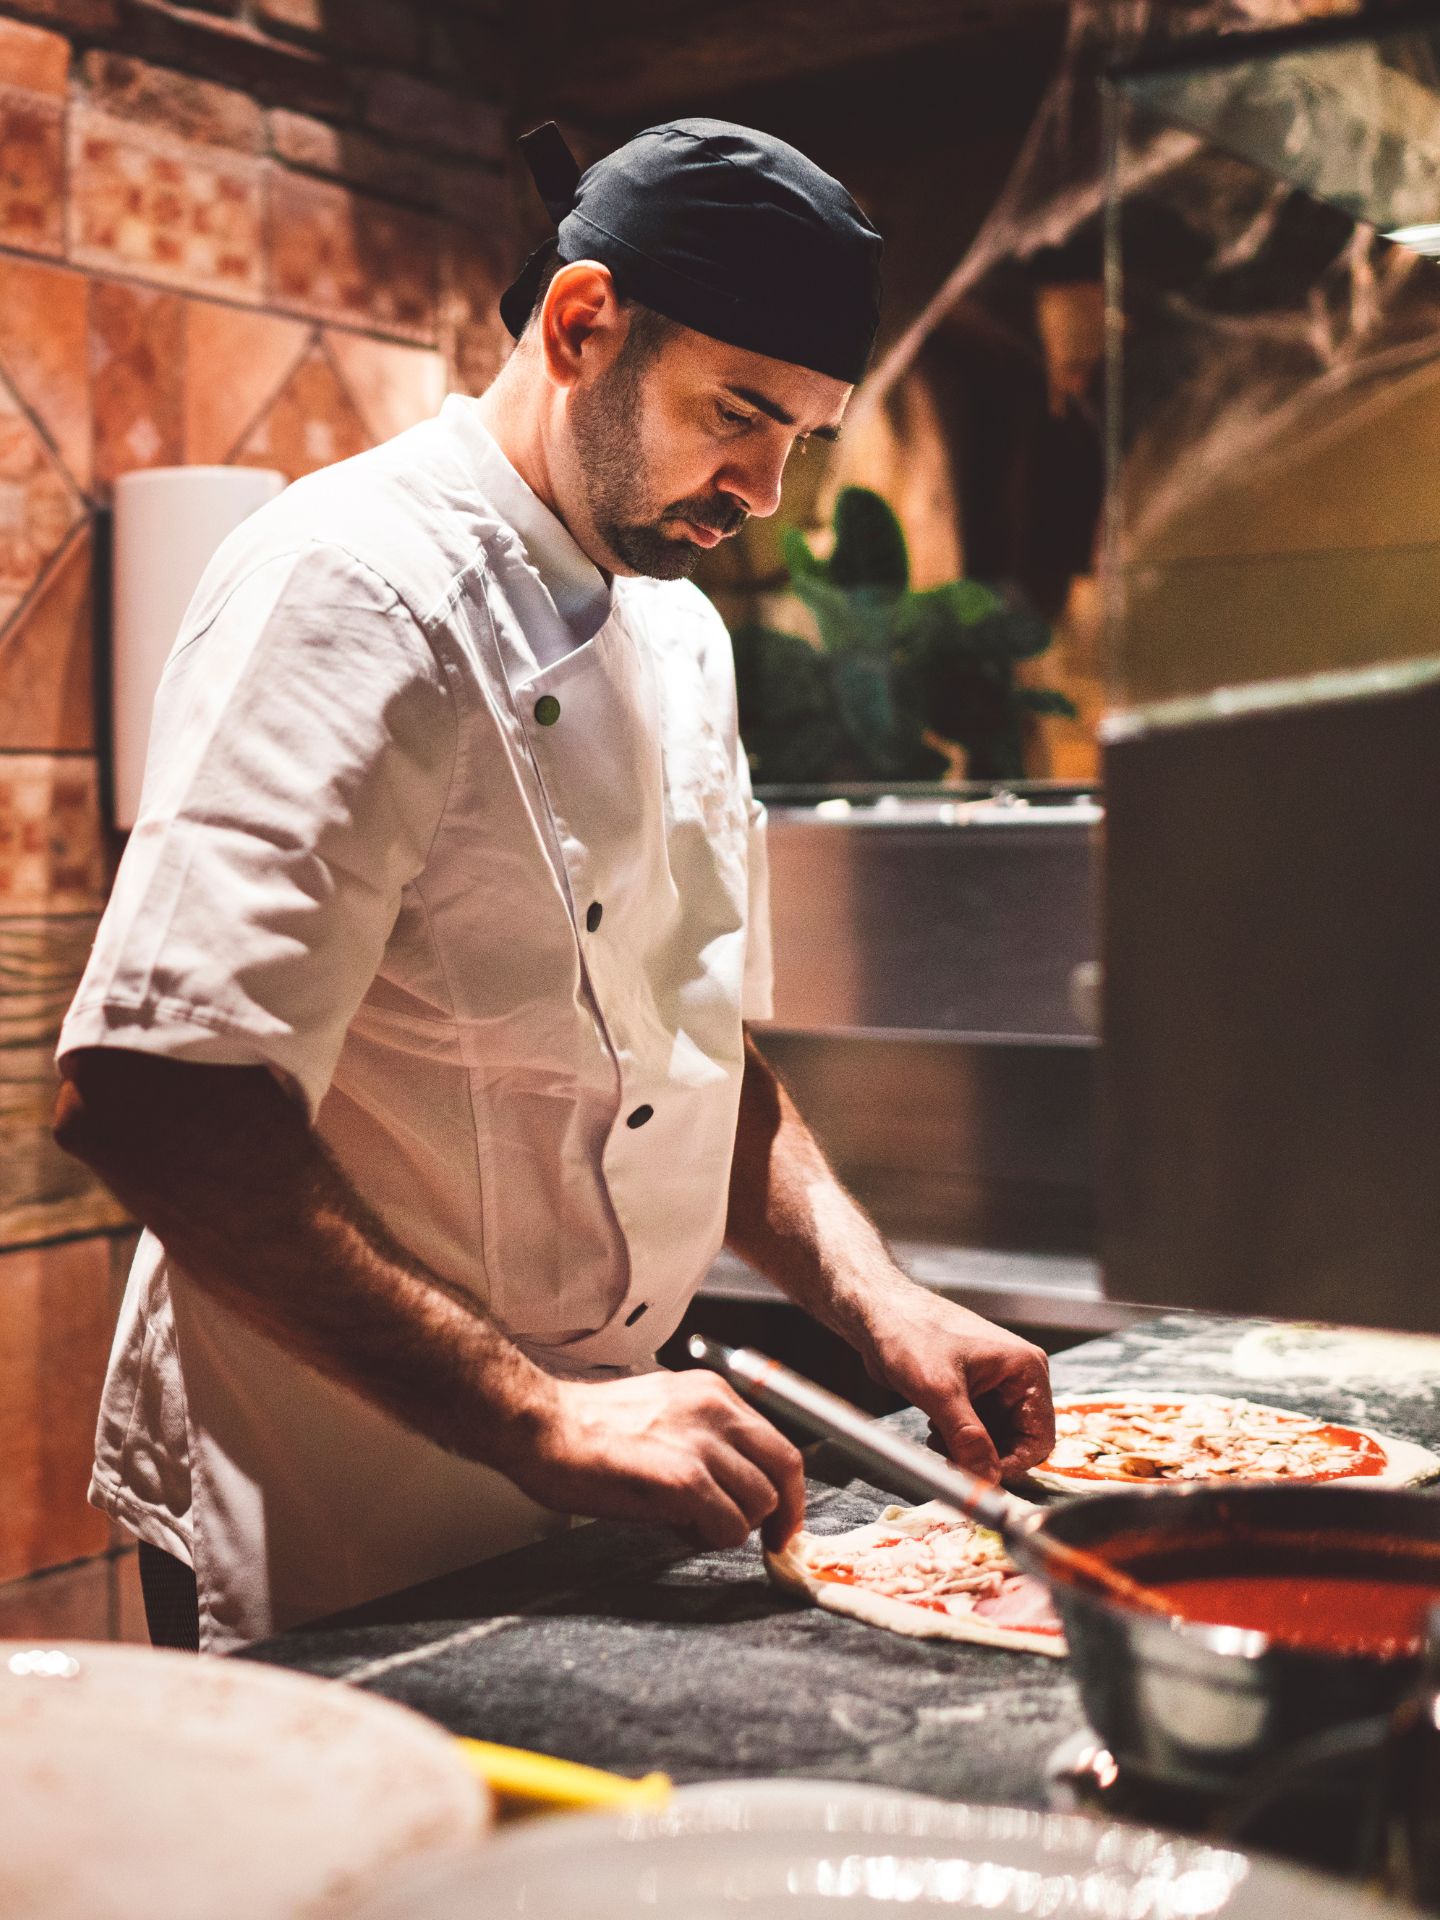 A man making a Neapolitan pizza in Italy.